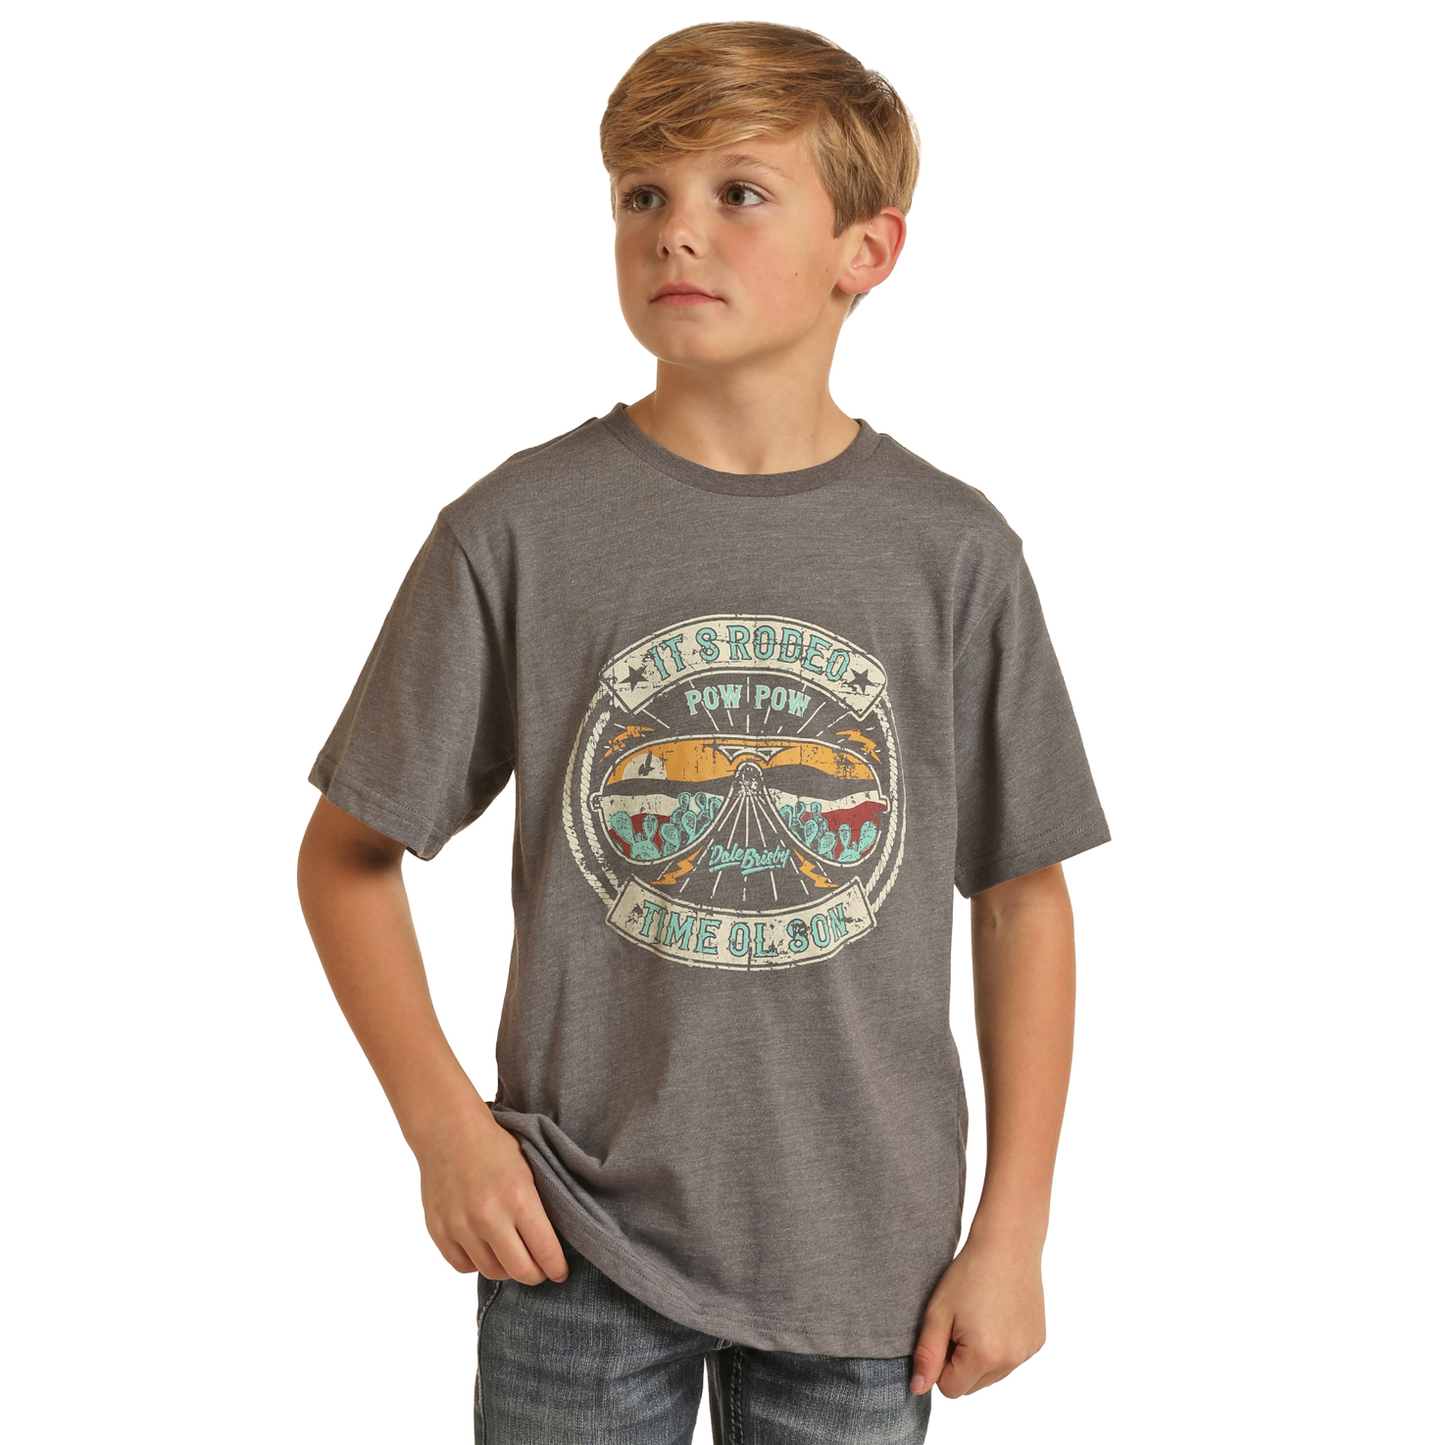 Rock & Roll® Youth Boy's "It's Rodeo Time" Graphic T-Shirt RRBT21R06B-02